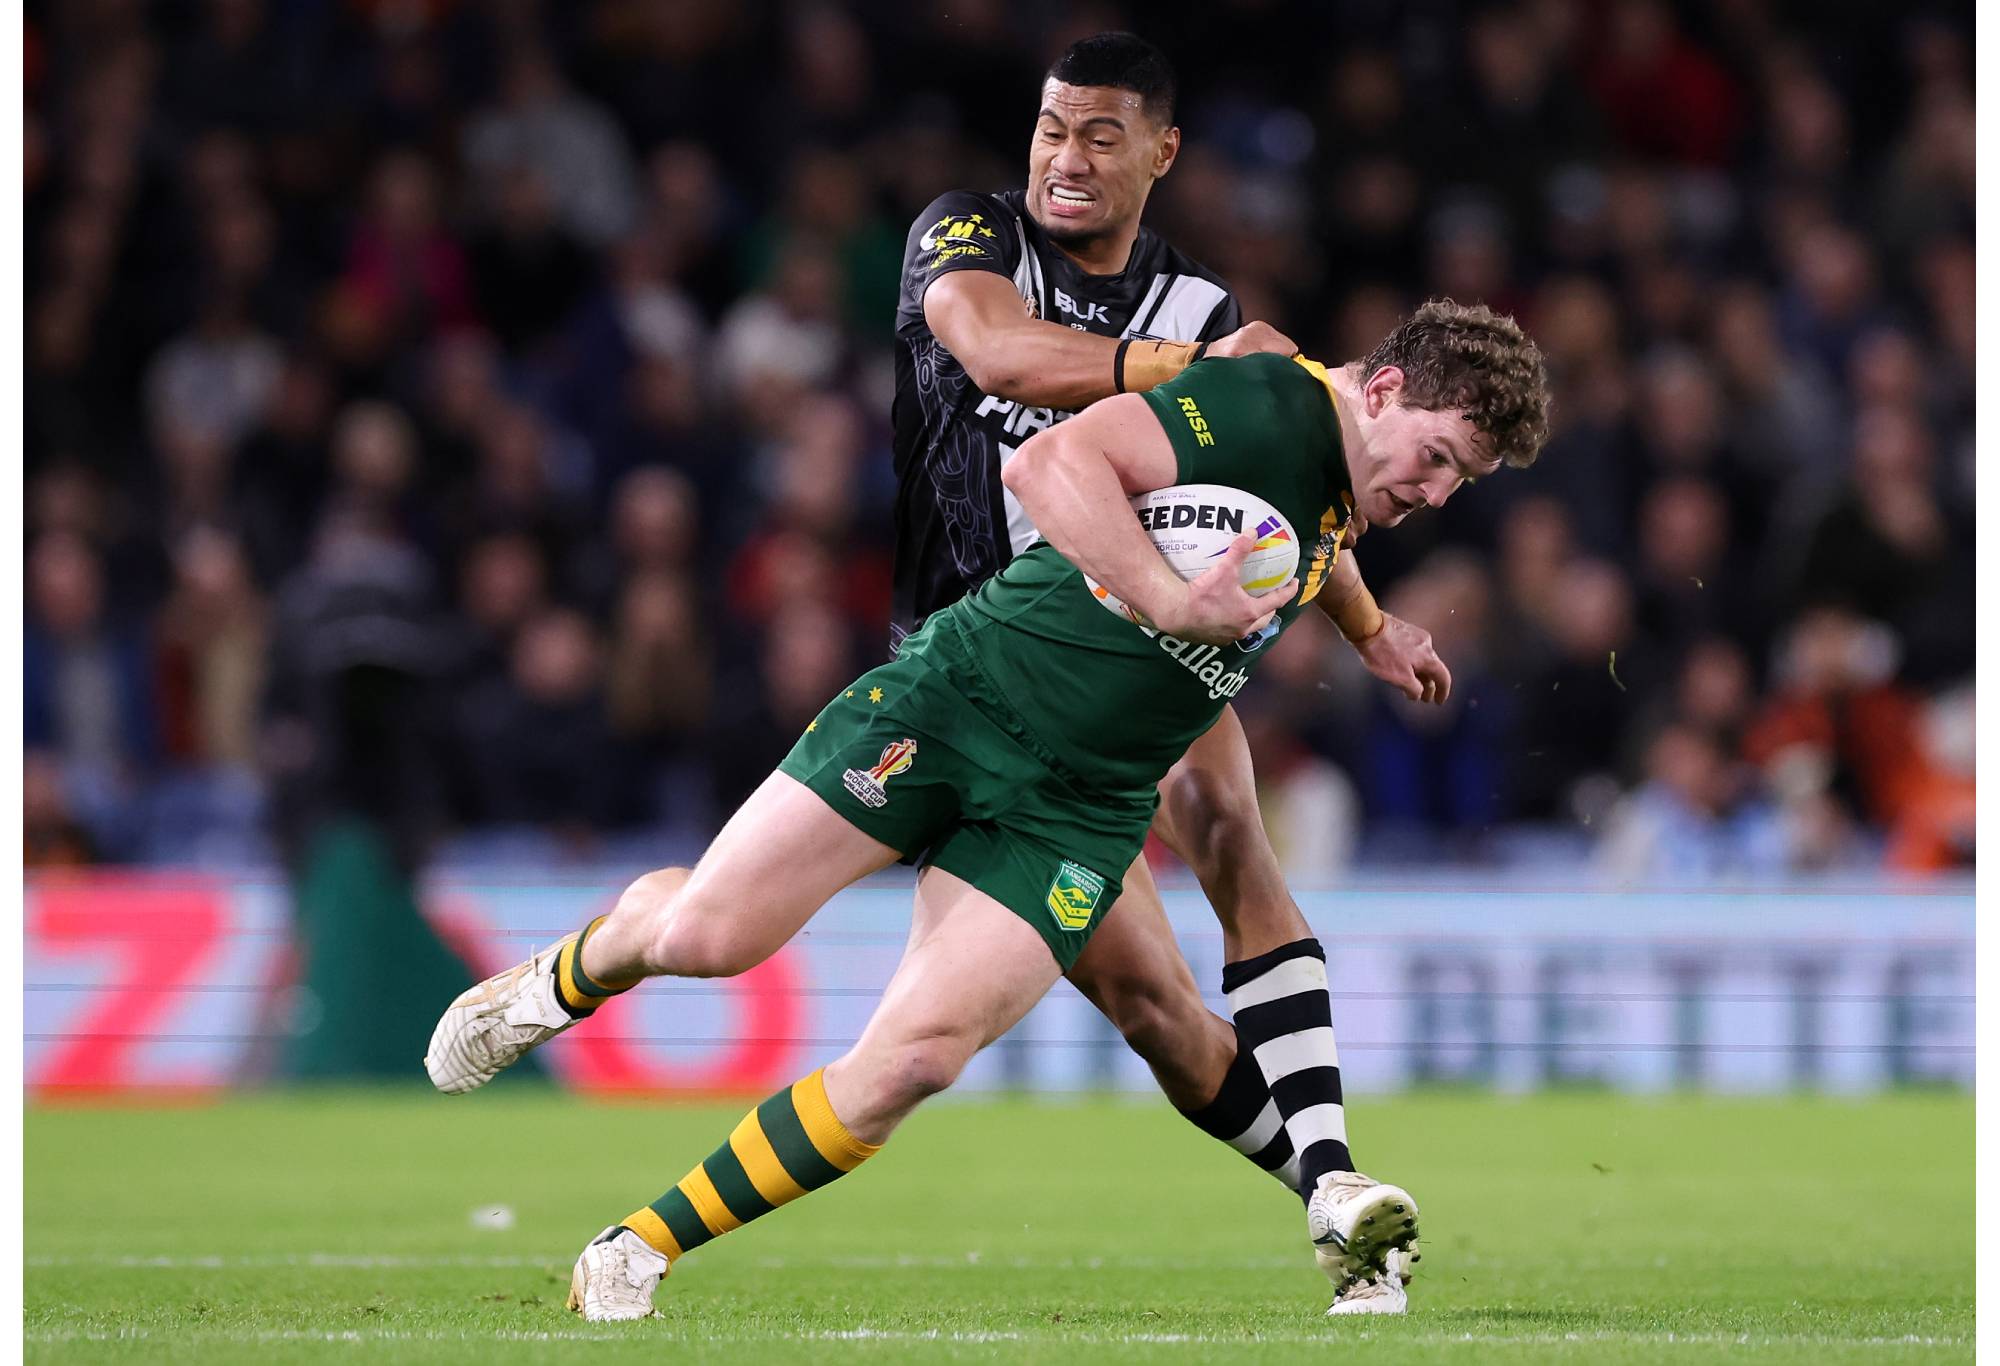 LEEDS, ENGLAND - NOVEMBER 11: Liam Martin of Australia is tackled by Ronaldo Mulitalo of New Zealand during the Rugby League World Cup Semi-Final match between Australia and New Zealand at Elland Road on November 11, 2022 in Leeds, England. (Photo by Alex Livesey/Getty Images for RLWC)